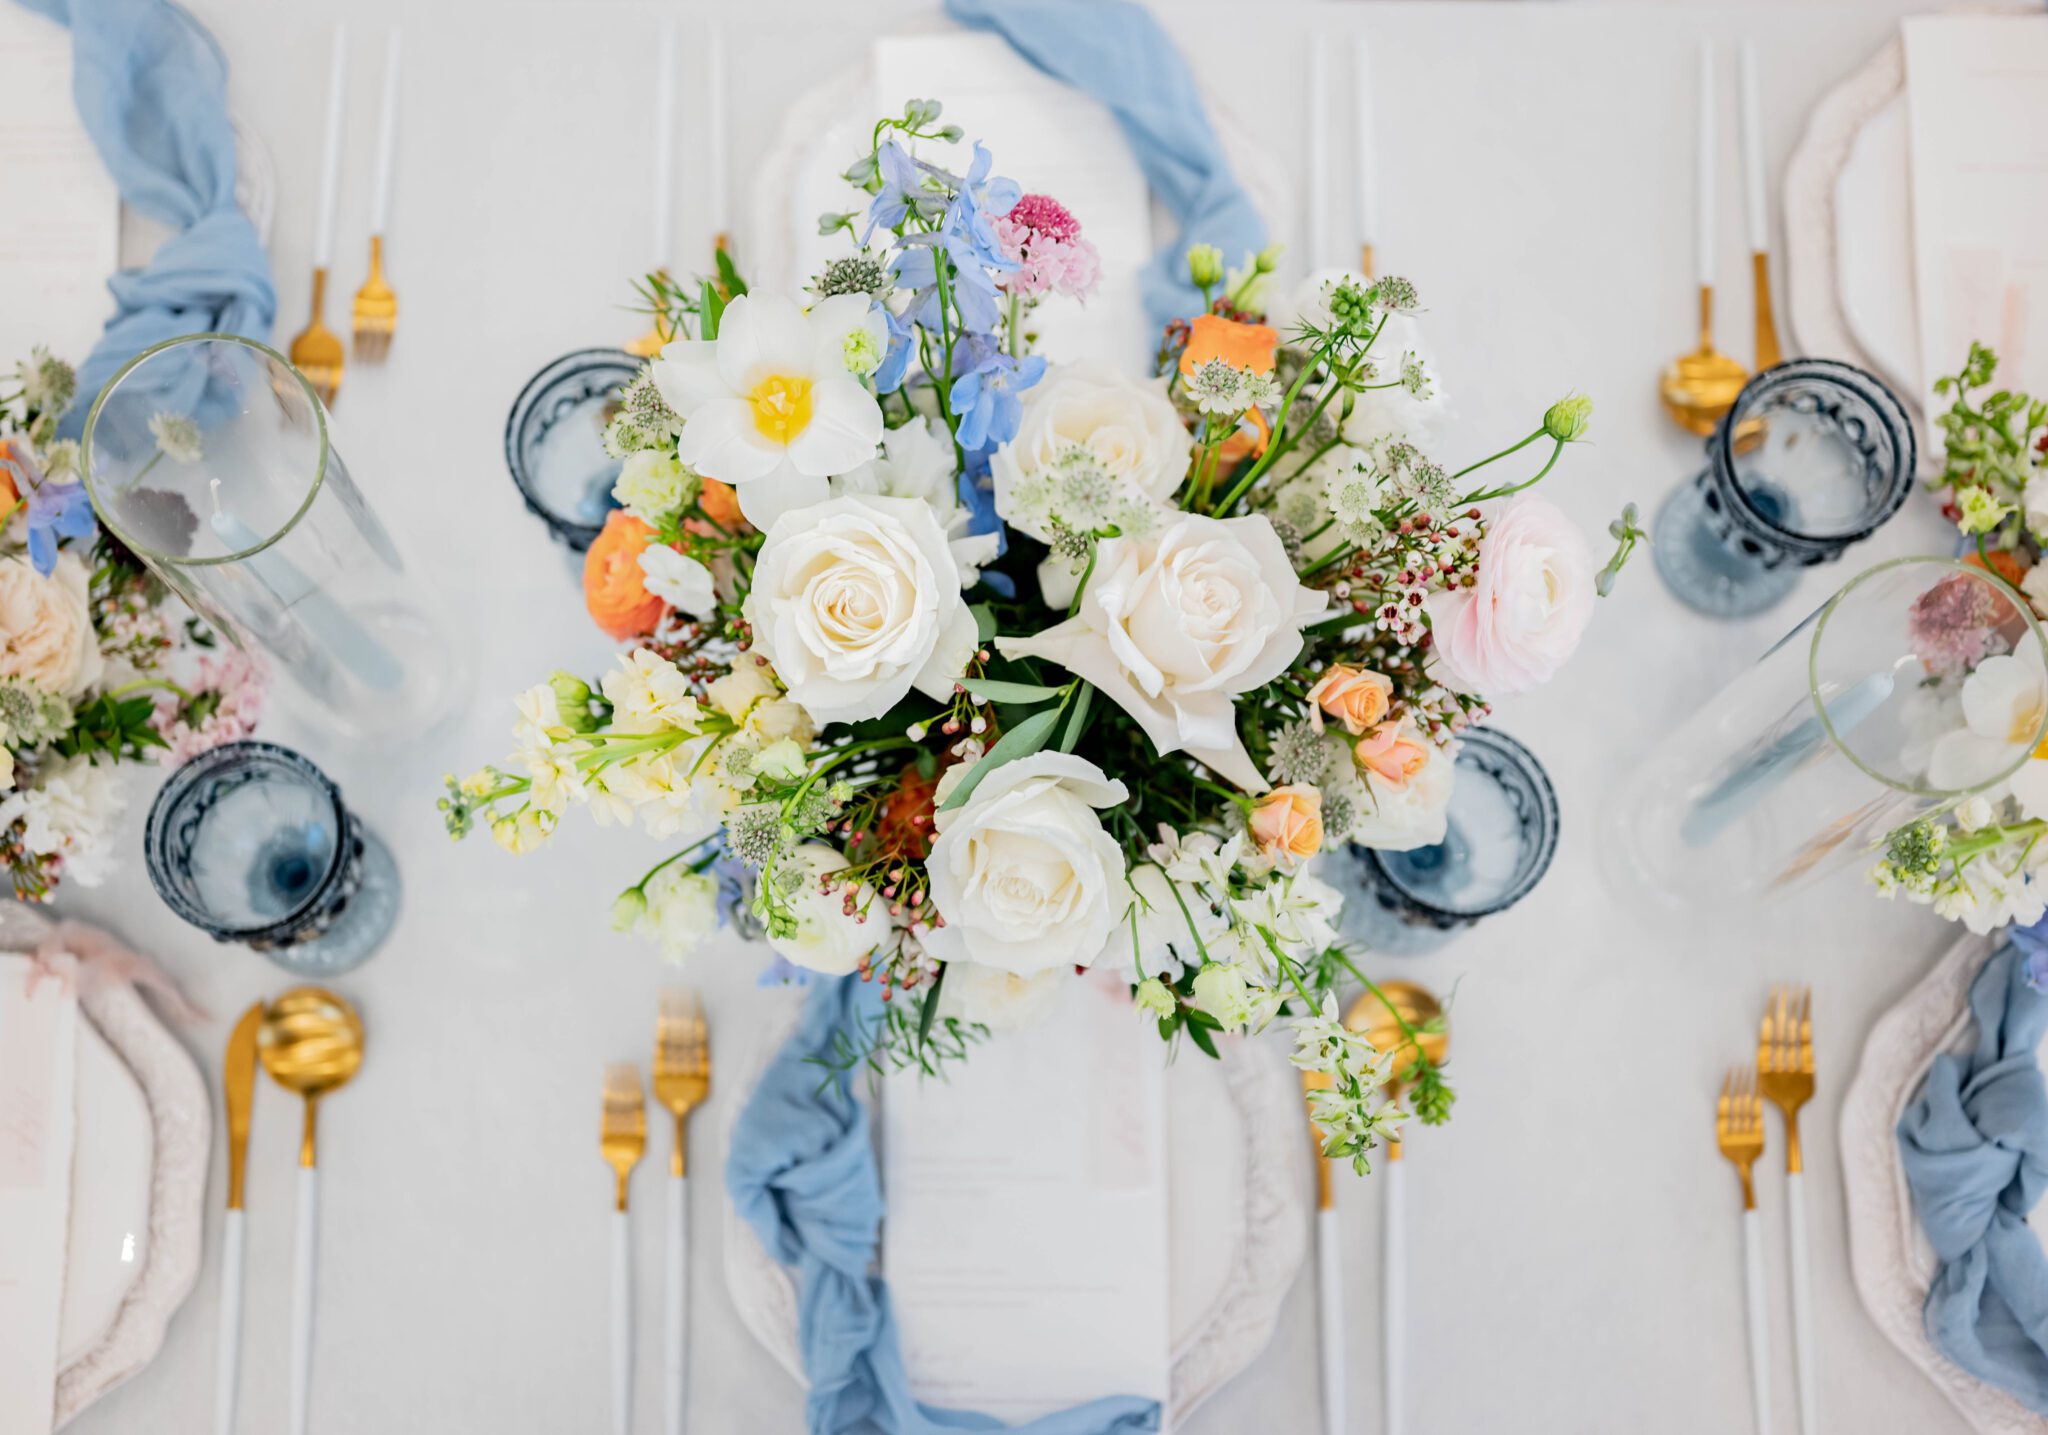 Wildflower wedding inspiration featuring pastel-inspired guest tables with charming floral arrangements, guest table adorned with white and gold cutlery and baby blue napkins delicately tied in a loose knot